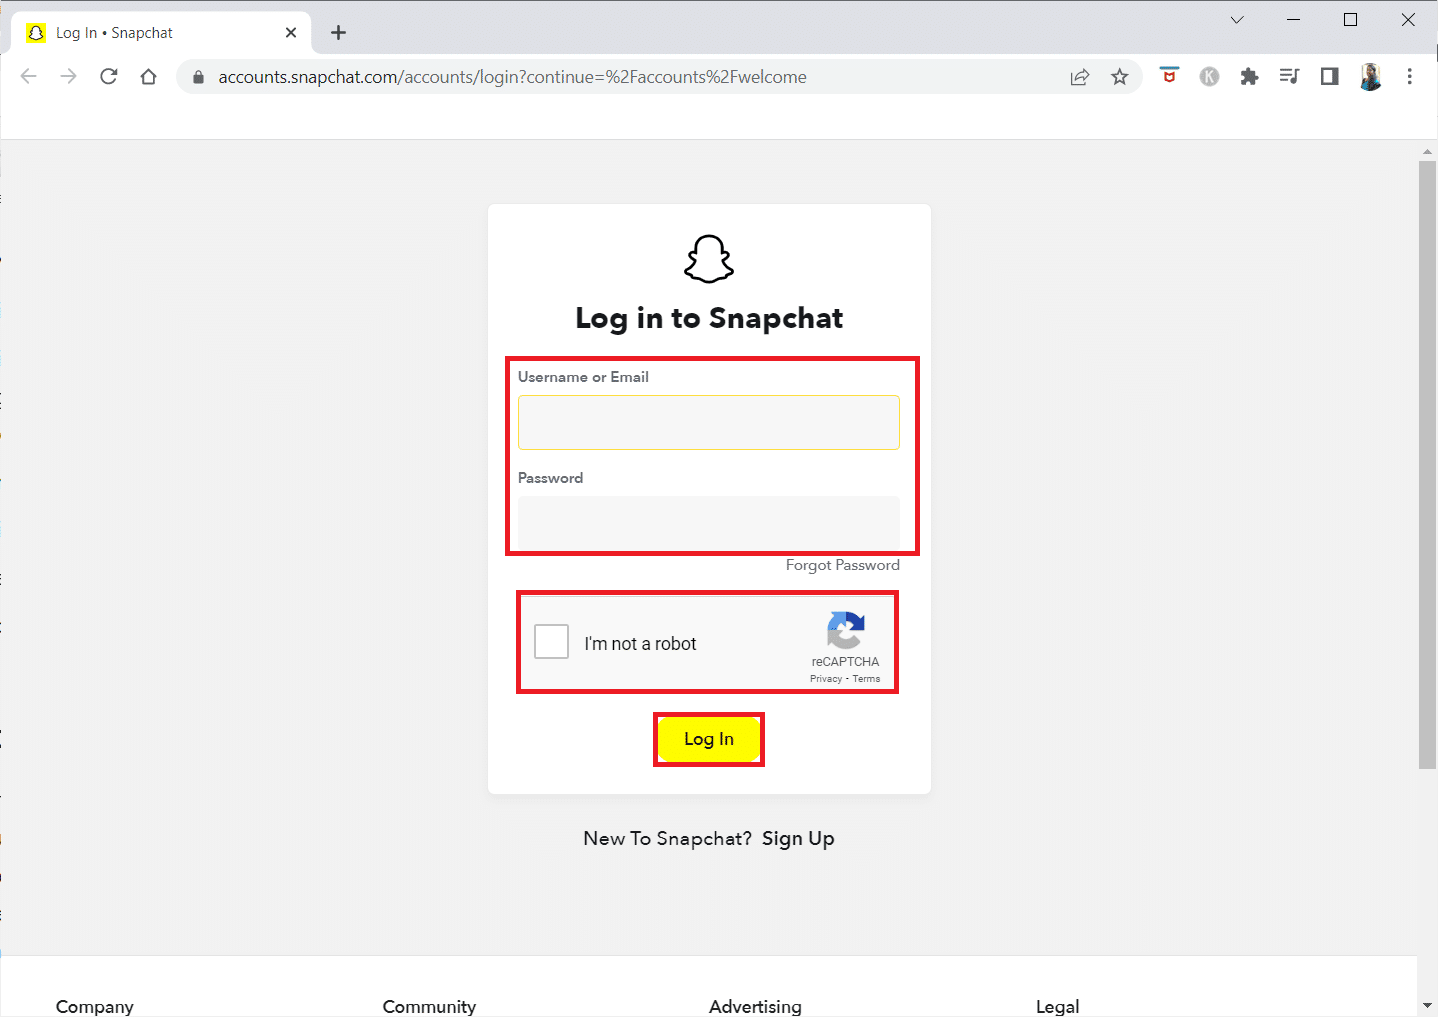 Enter your login credentials, verify the reCAPTCHA, and click on the Log In button to log in to your account